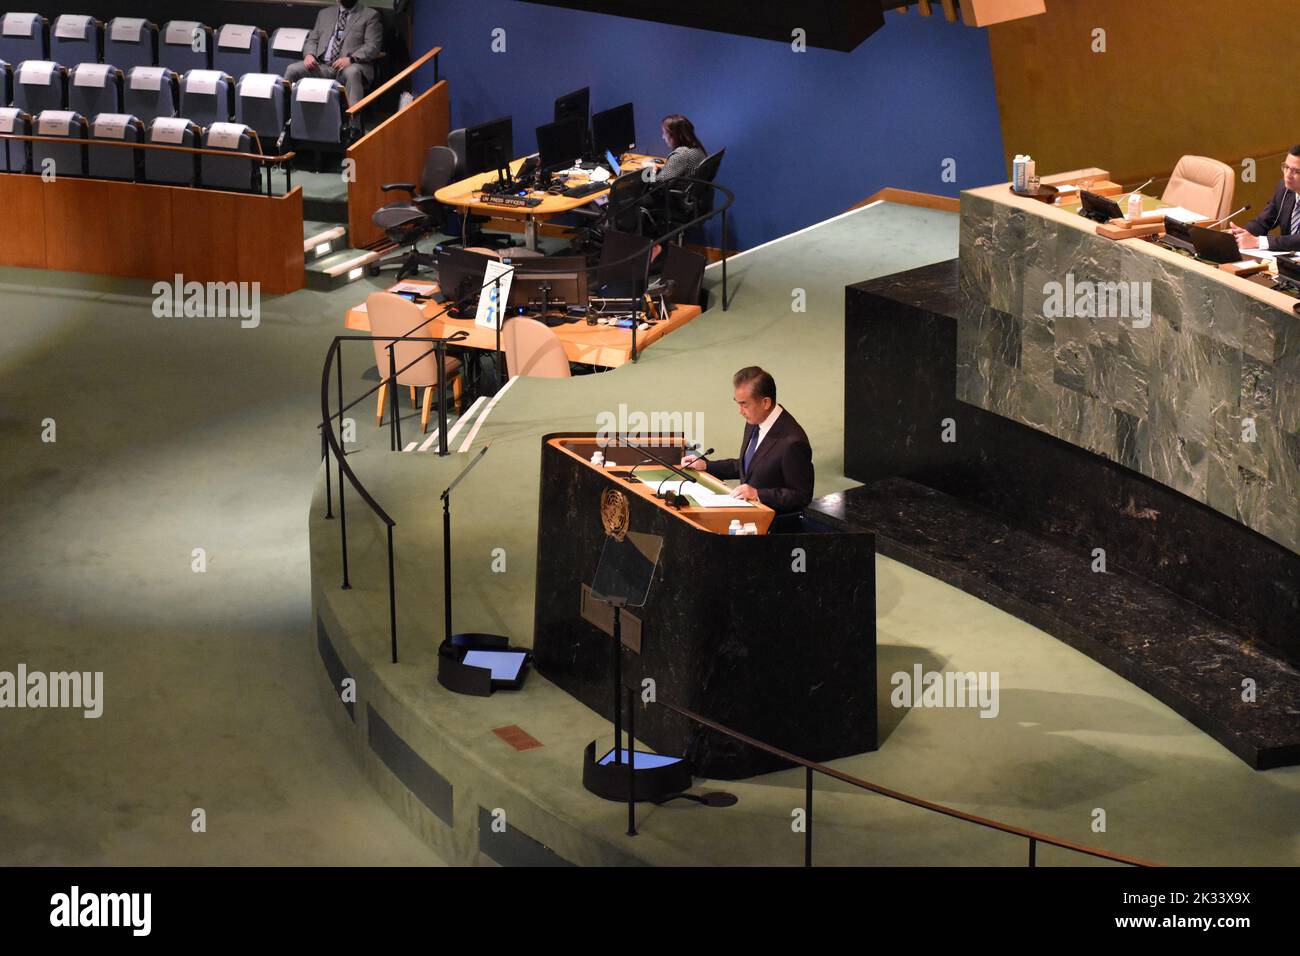 New York City, United States. 24th Sep, 2022.Chinese State Councilor and Minister for Foreign Affairs Wang Yi speaks at the 77th UN General Assembly in New York City. Credit: Ryan Rahman/Alamy Live News. Stock Photo